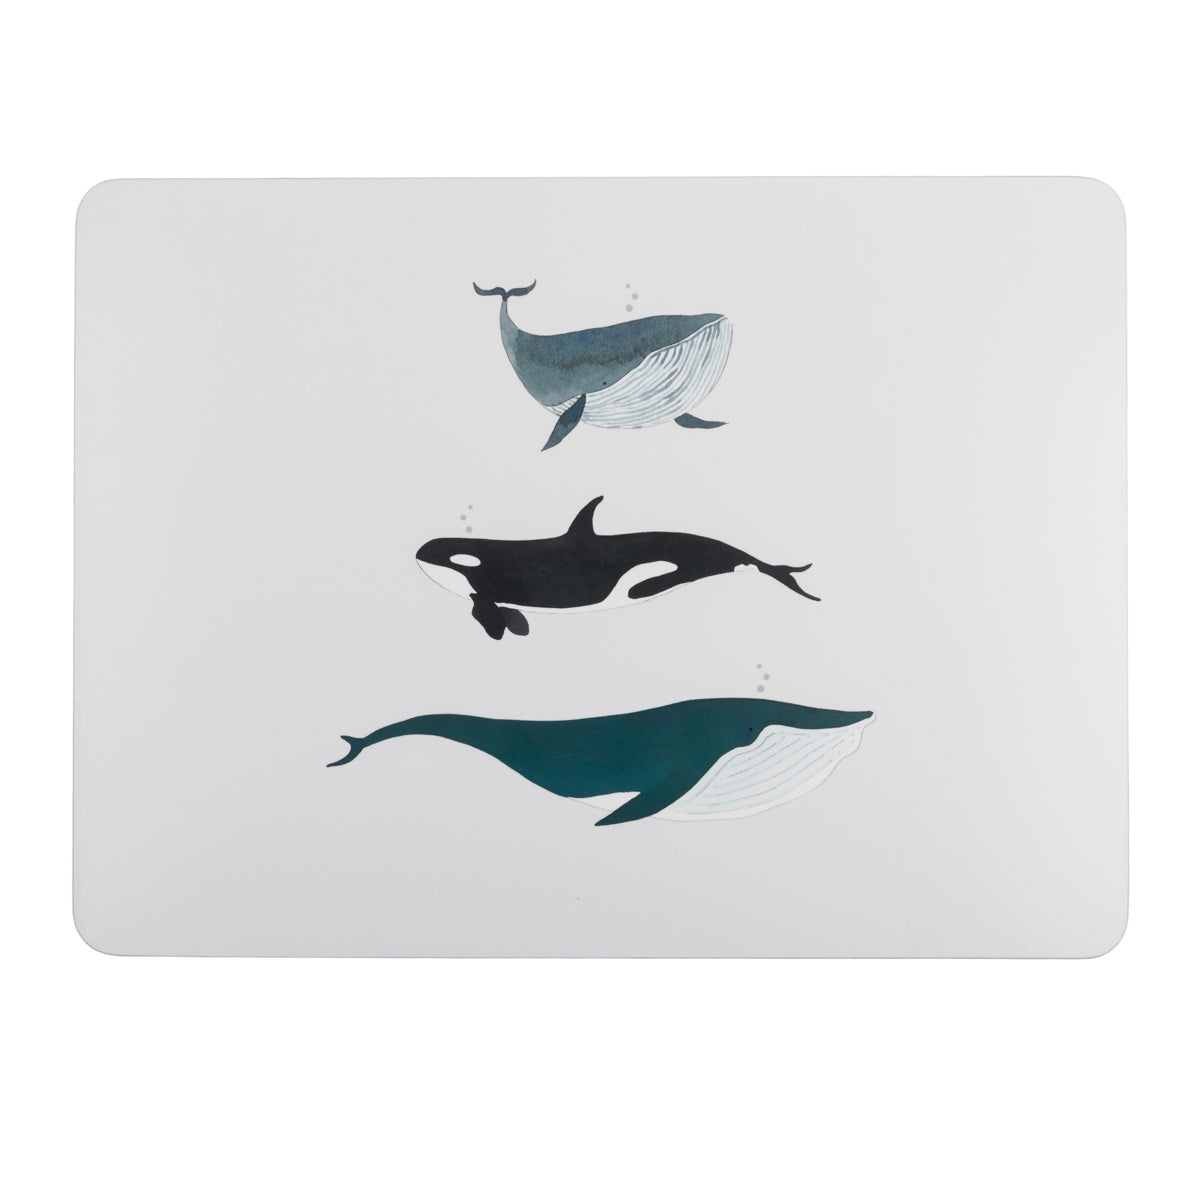 Whales Cork Place mats (set of 4) by Sophie Allport